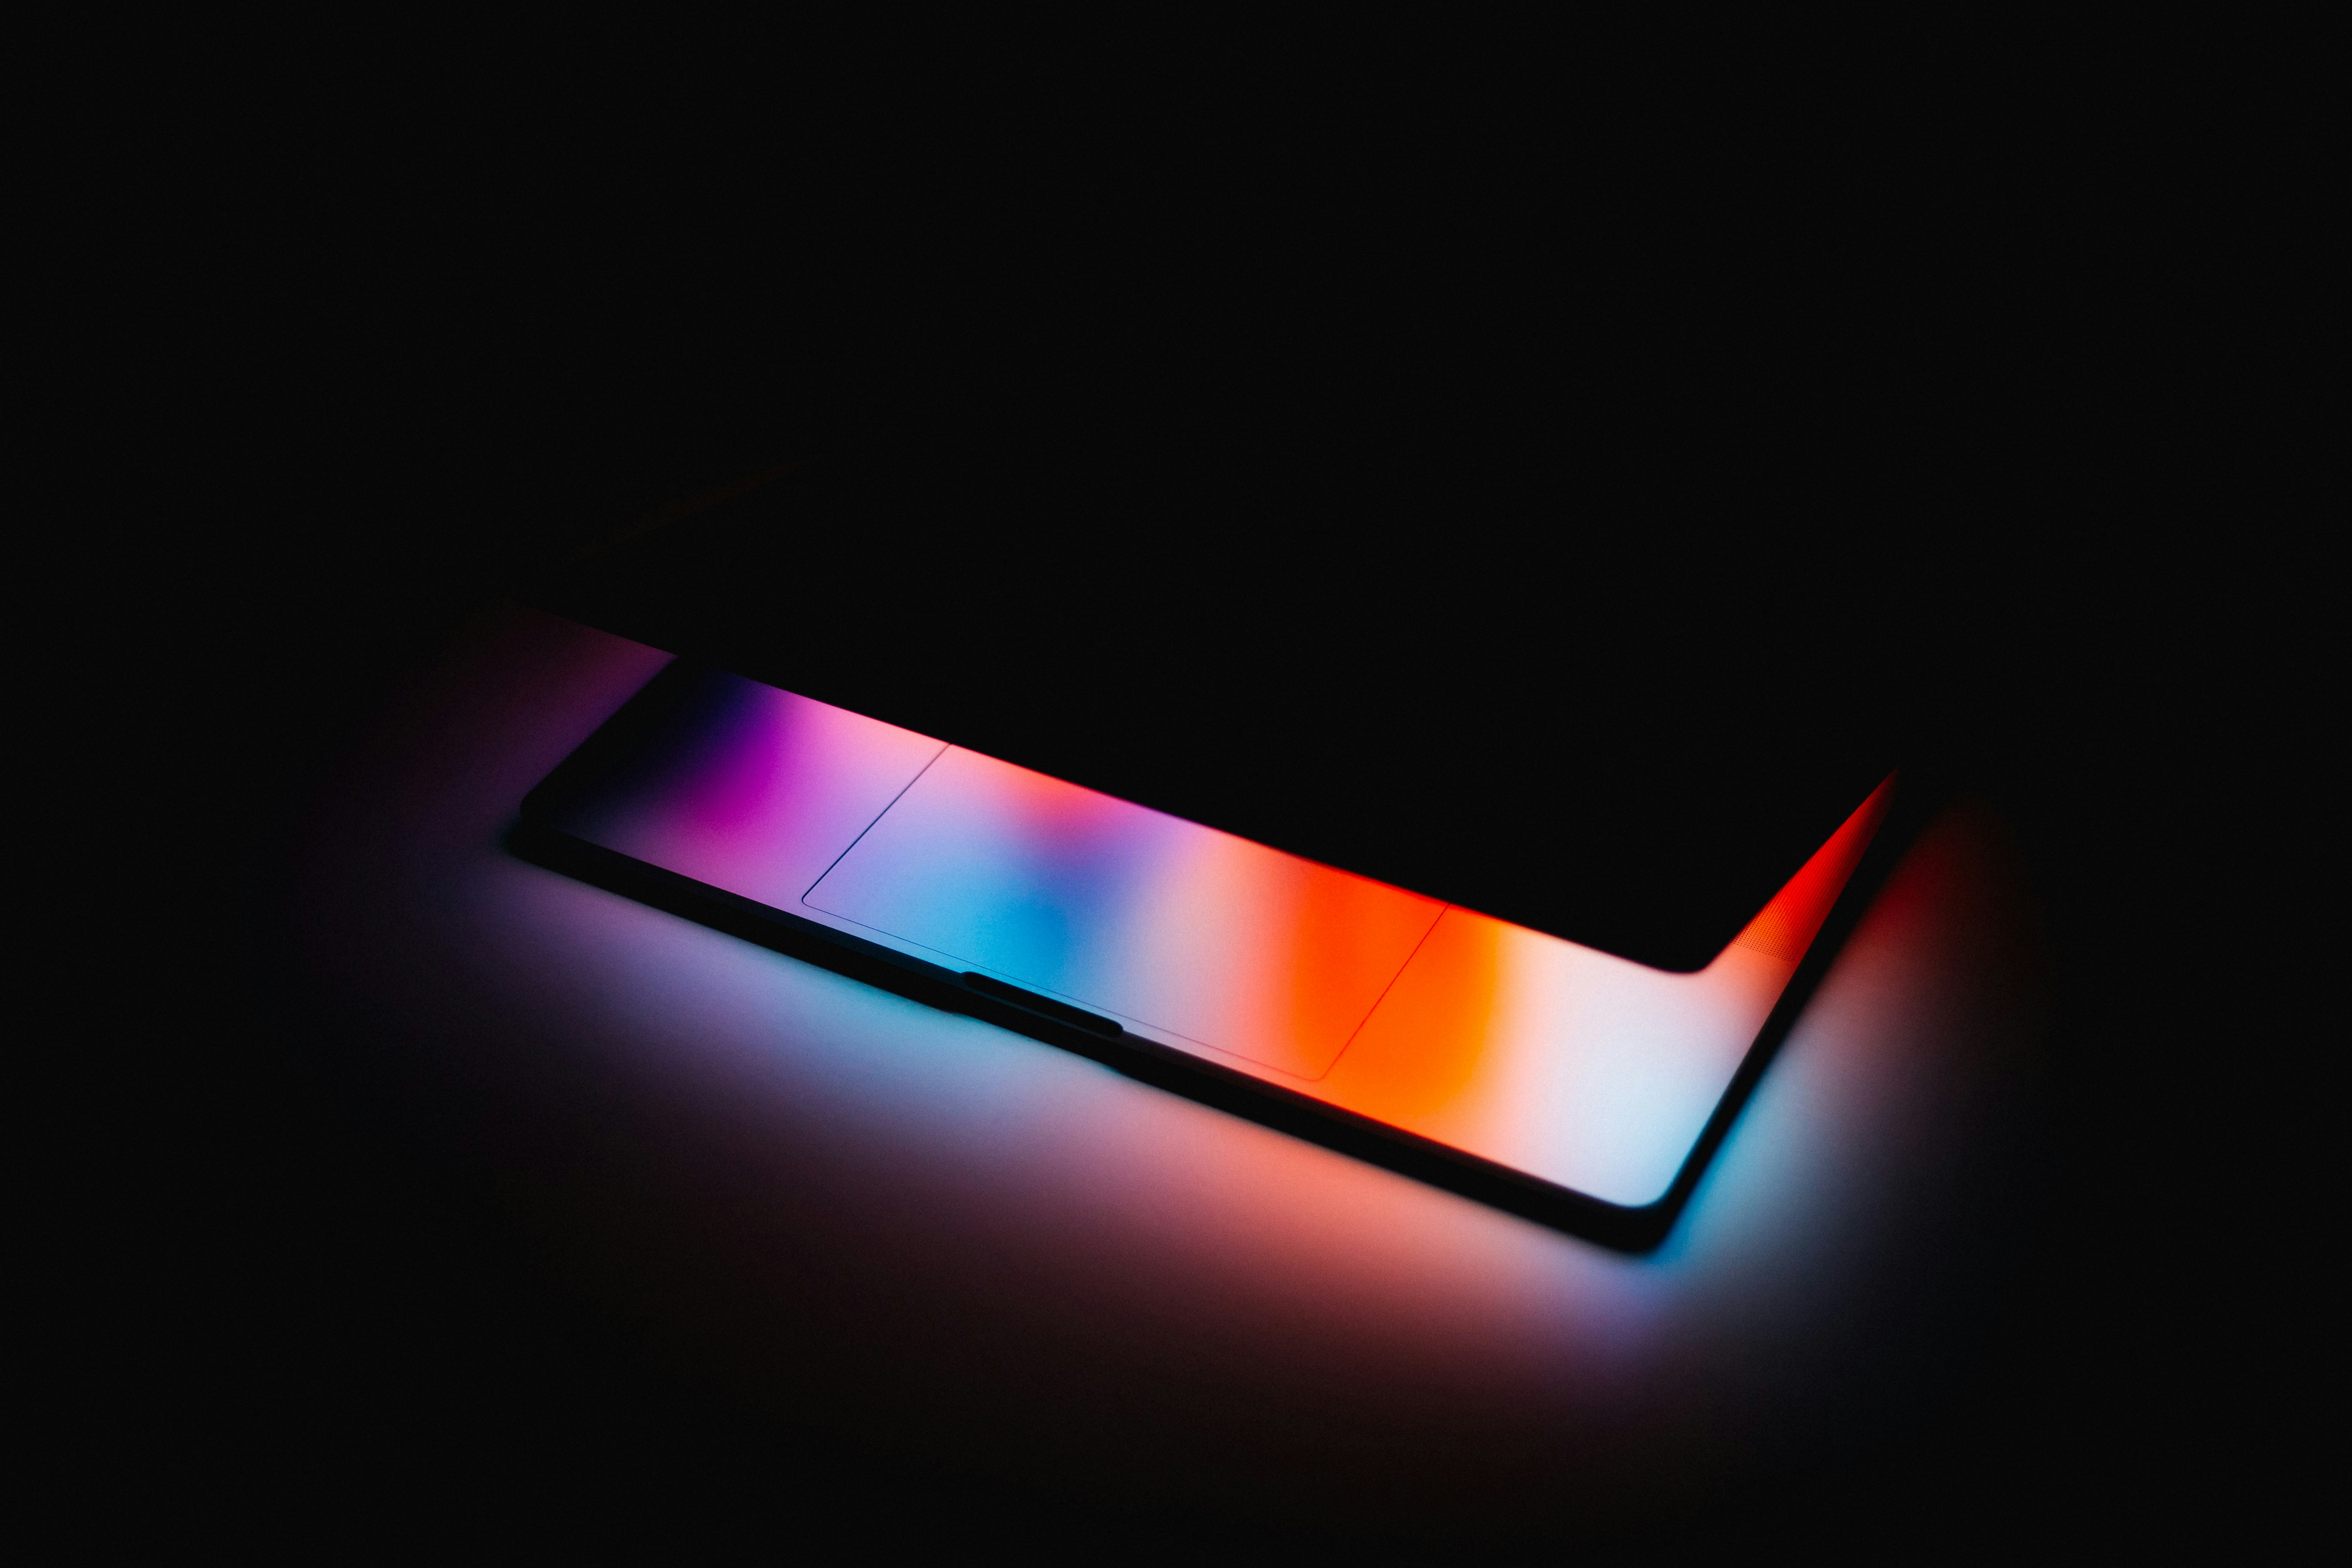 General 5472x3648 laptop dark colorful Andras Vas photography simple background low light